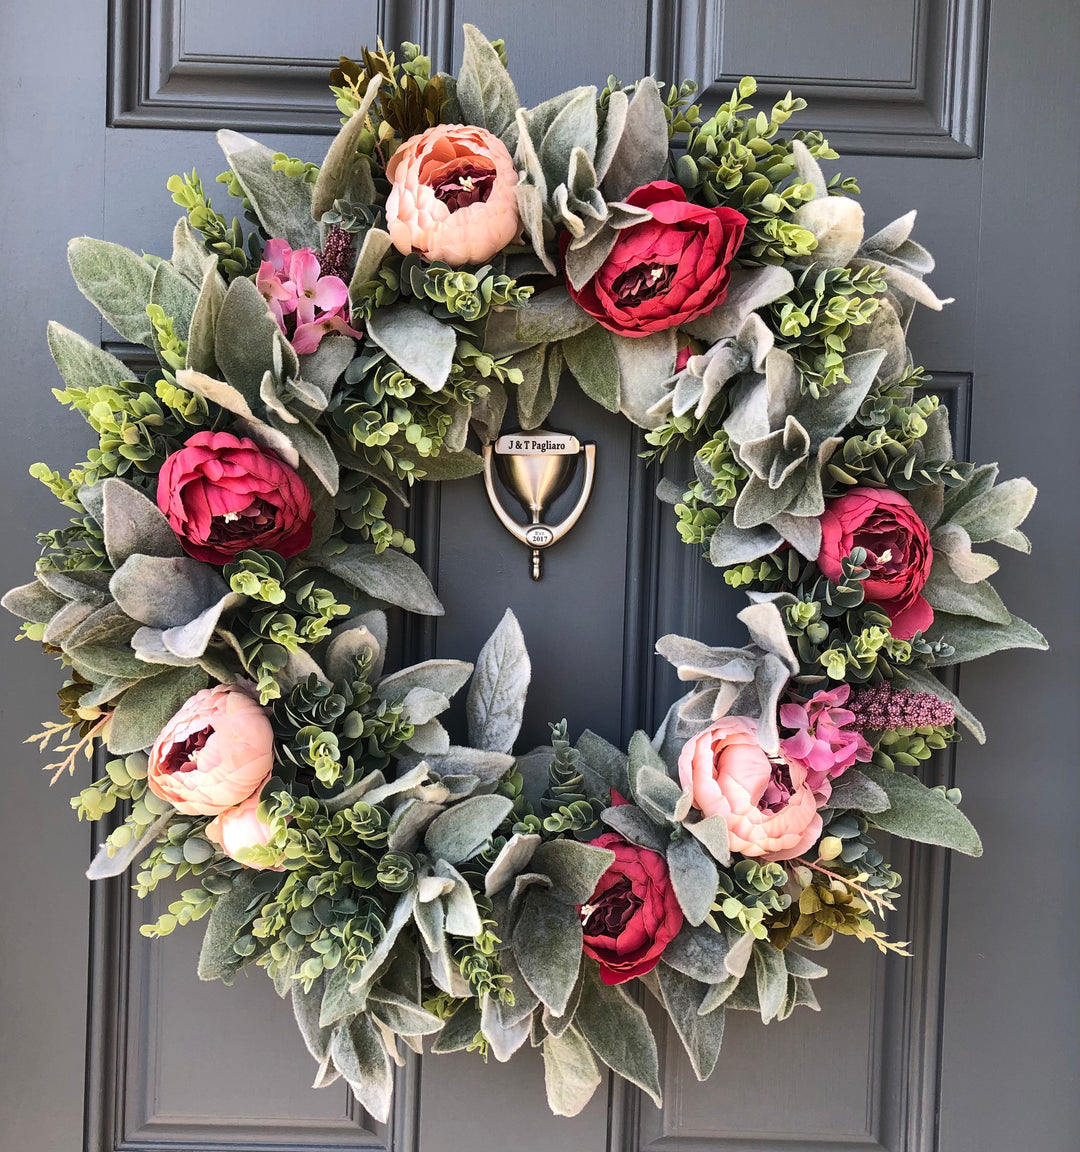 Spring front door wreath with lambs ear, peonies in pink, wedding shower decor, cottagecore, Housewarming Gift, Home Decor, Farmhouse decor